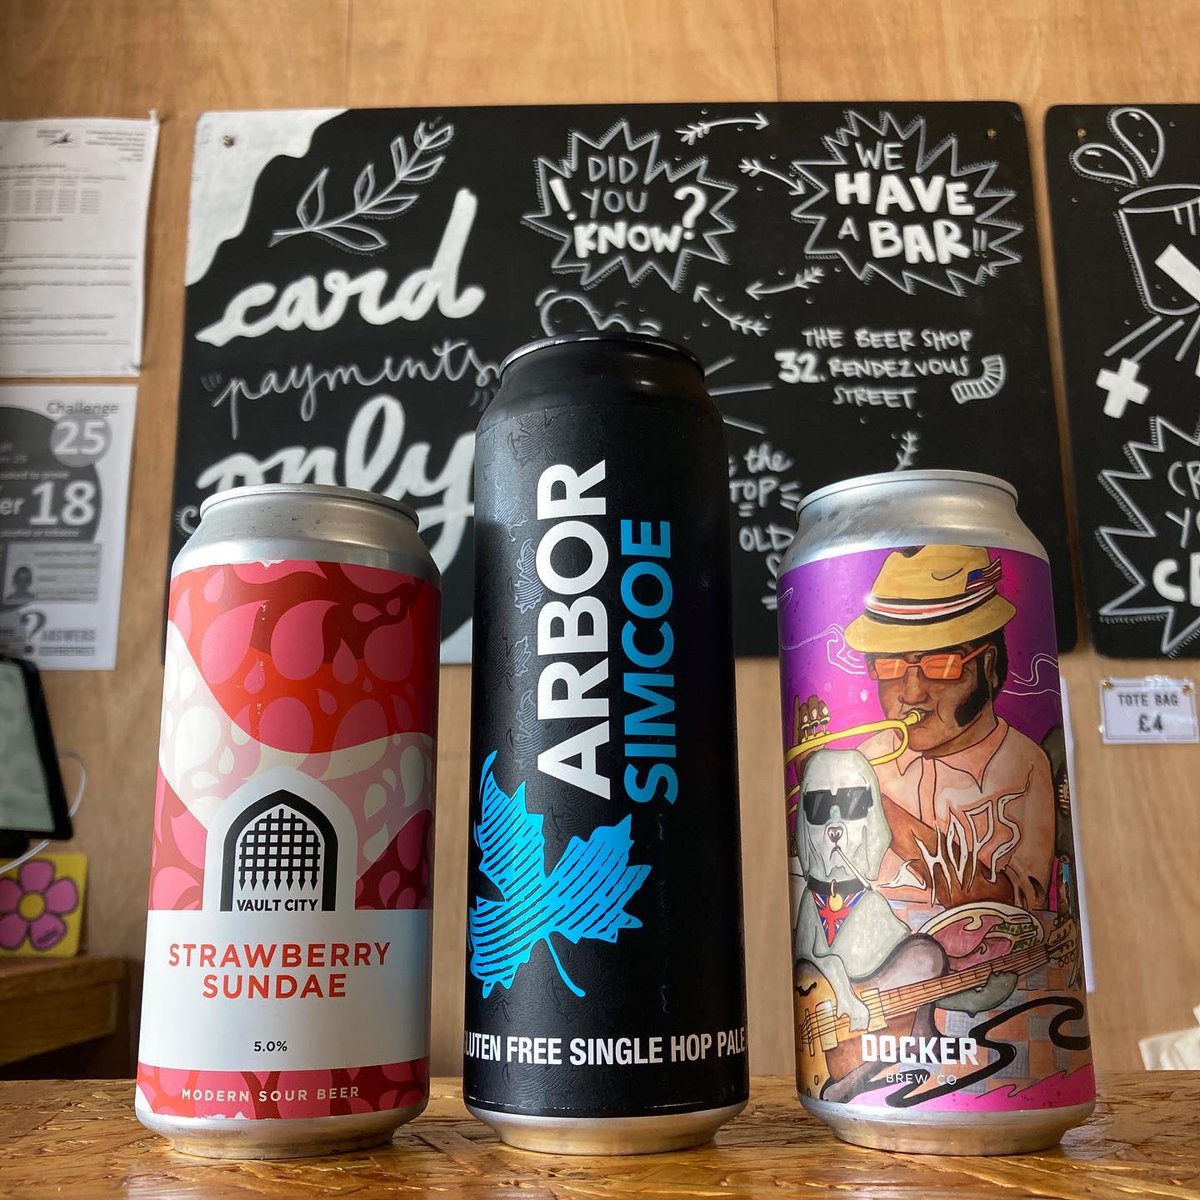 Loadsa new bits have gone into our @FstoneHbourArm market hut fridges this weekend. 
The hut is open 11-6pm today if you wanna round off your bank holiday nicely… 
#Folkestone #BeerShop #BeerShopHarbourArm #FolkestoneHarbourArm #HarbourArmMarket #Kent #KeepItKent #LoveFolkestone